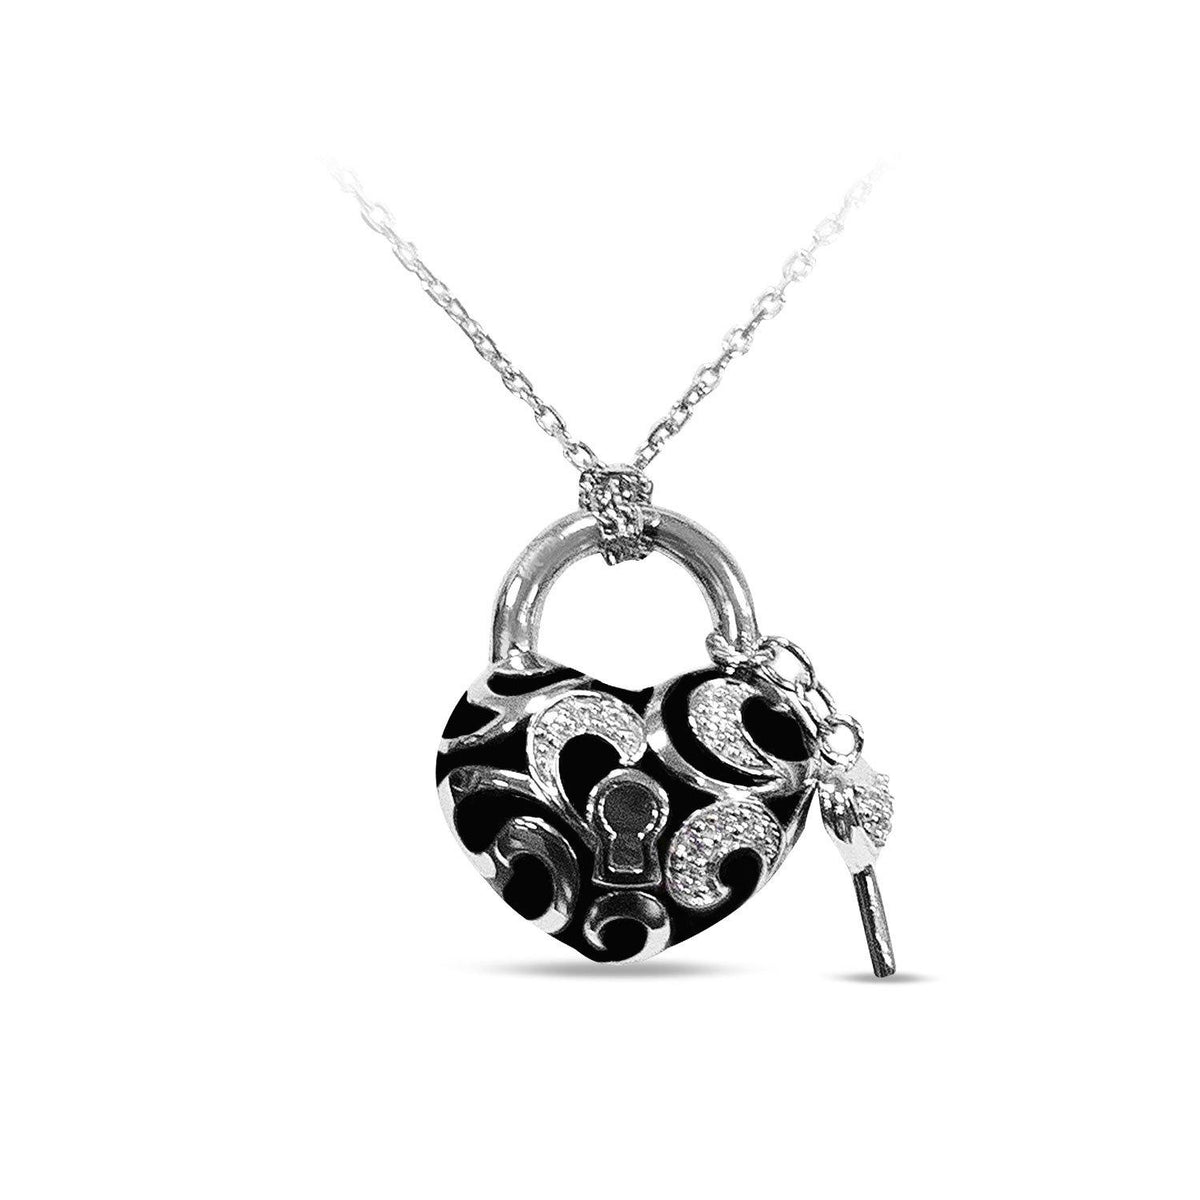 Edgy Heart Key Chain Necklace